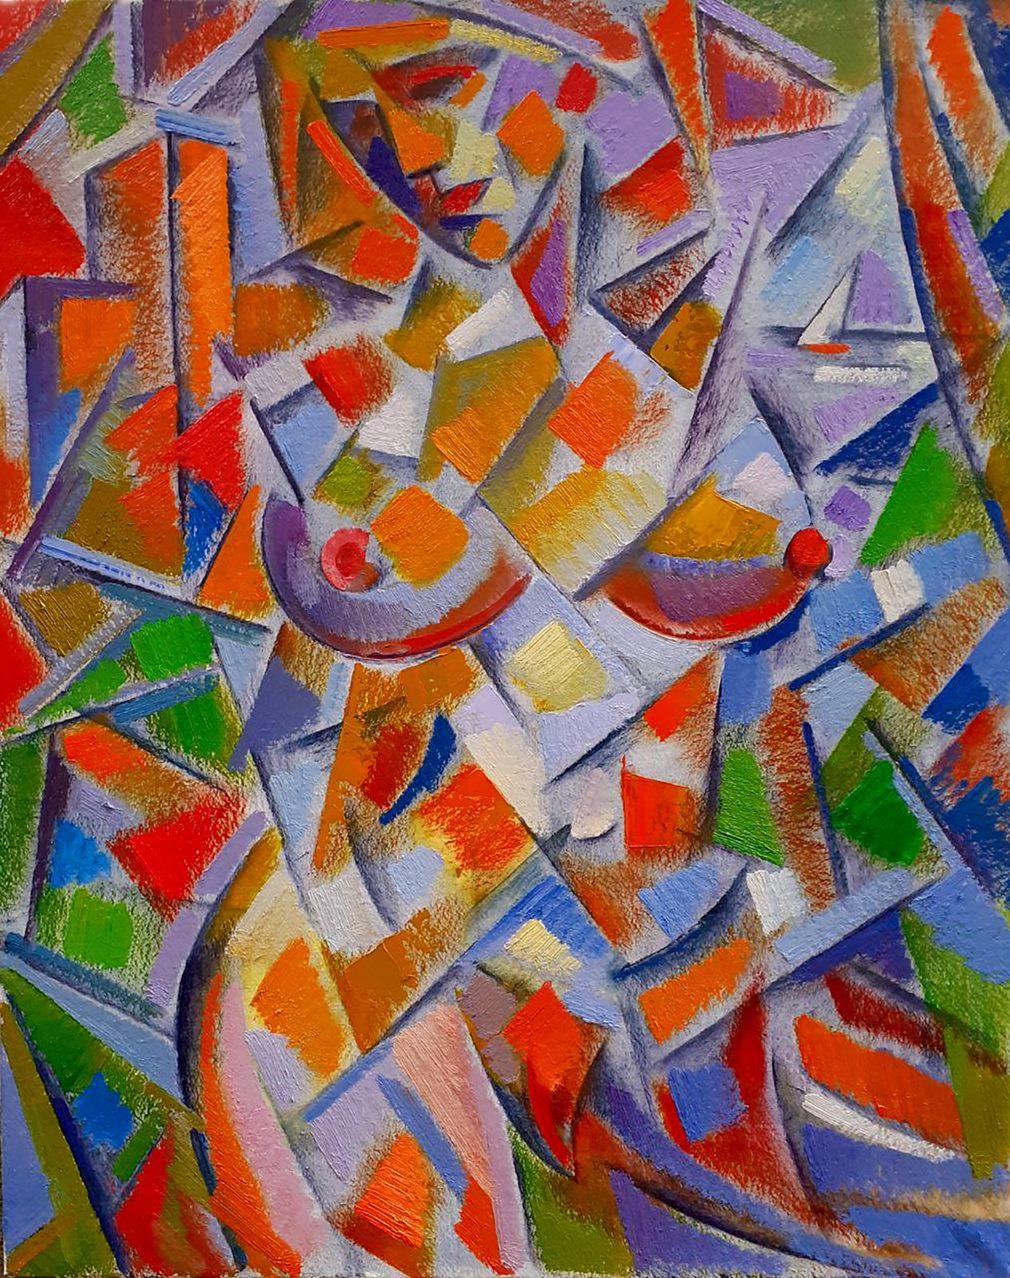 Nude Woman, Cubism, Pablo Picasso, Original oil Painting, Ready to Hang